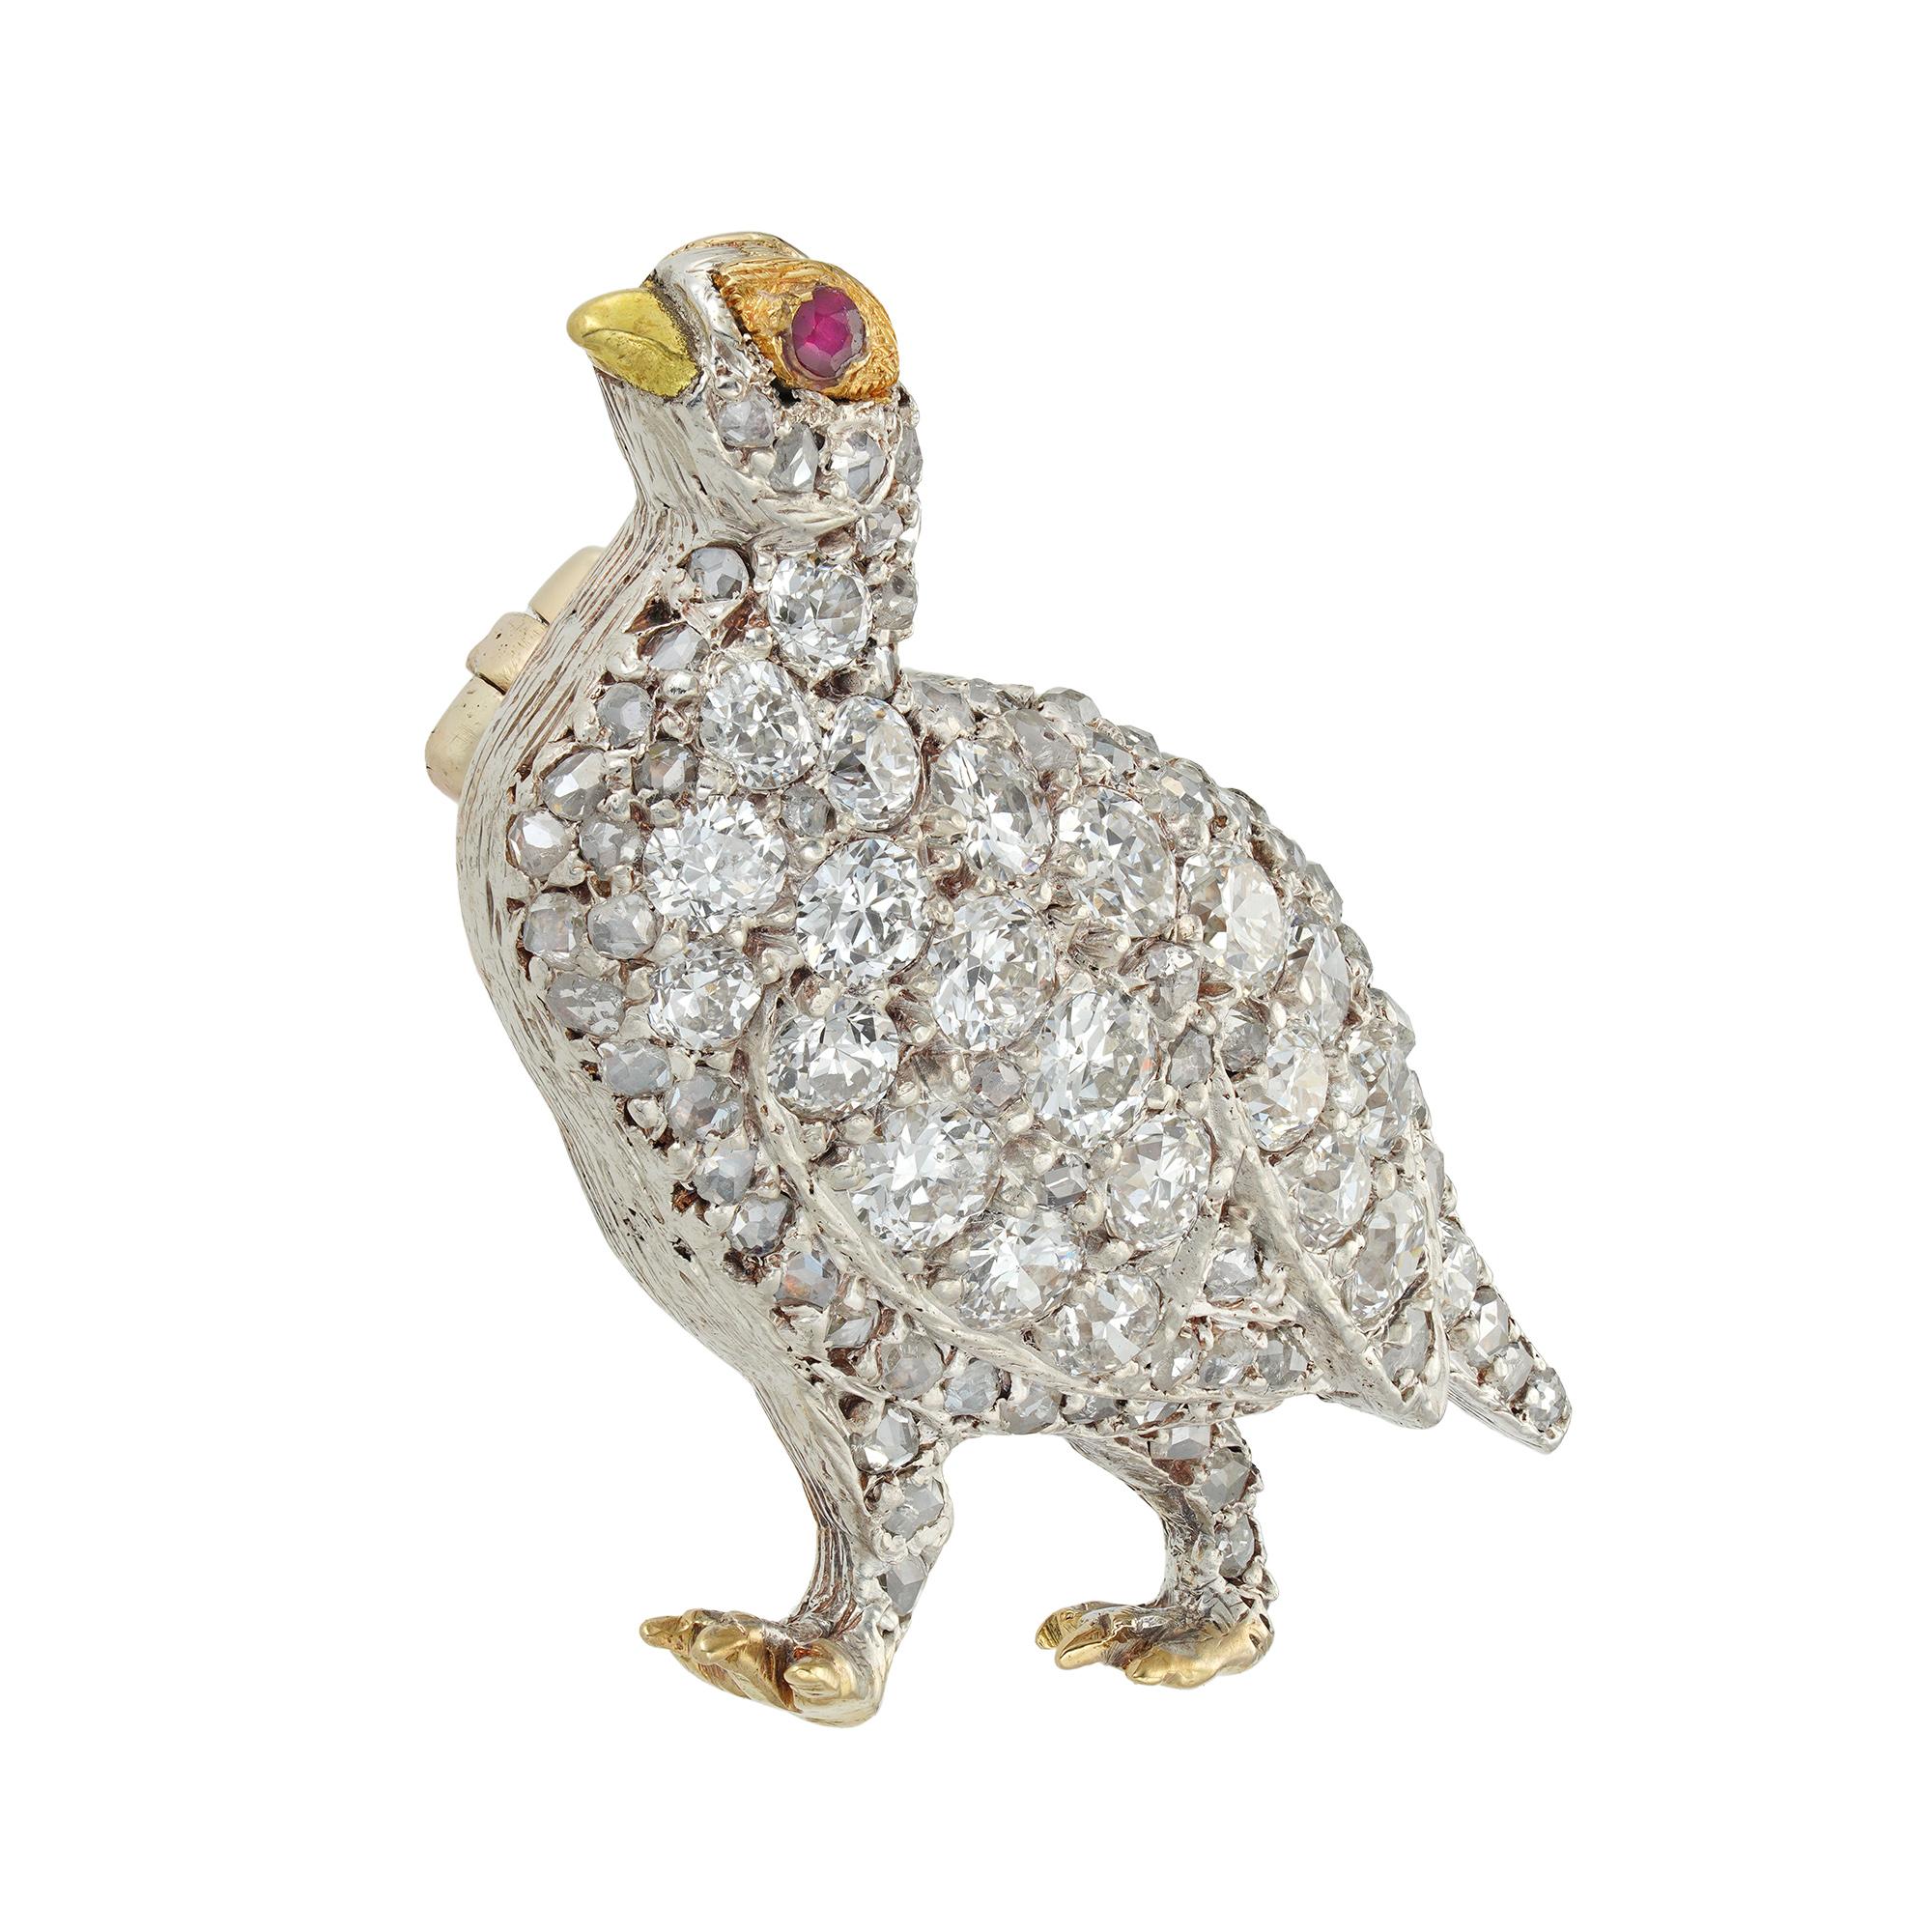 A Victorian diamond set partridge brooch, set throughout with old brilliant-cut and rose-cut diamonds, estimated to weigh a total of 1 carat, with a ruby set to the eye, silver set to a gold mount with a brooch pin fitting, circa 1890, measuring